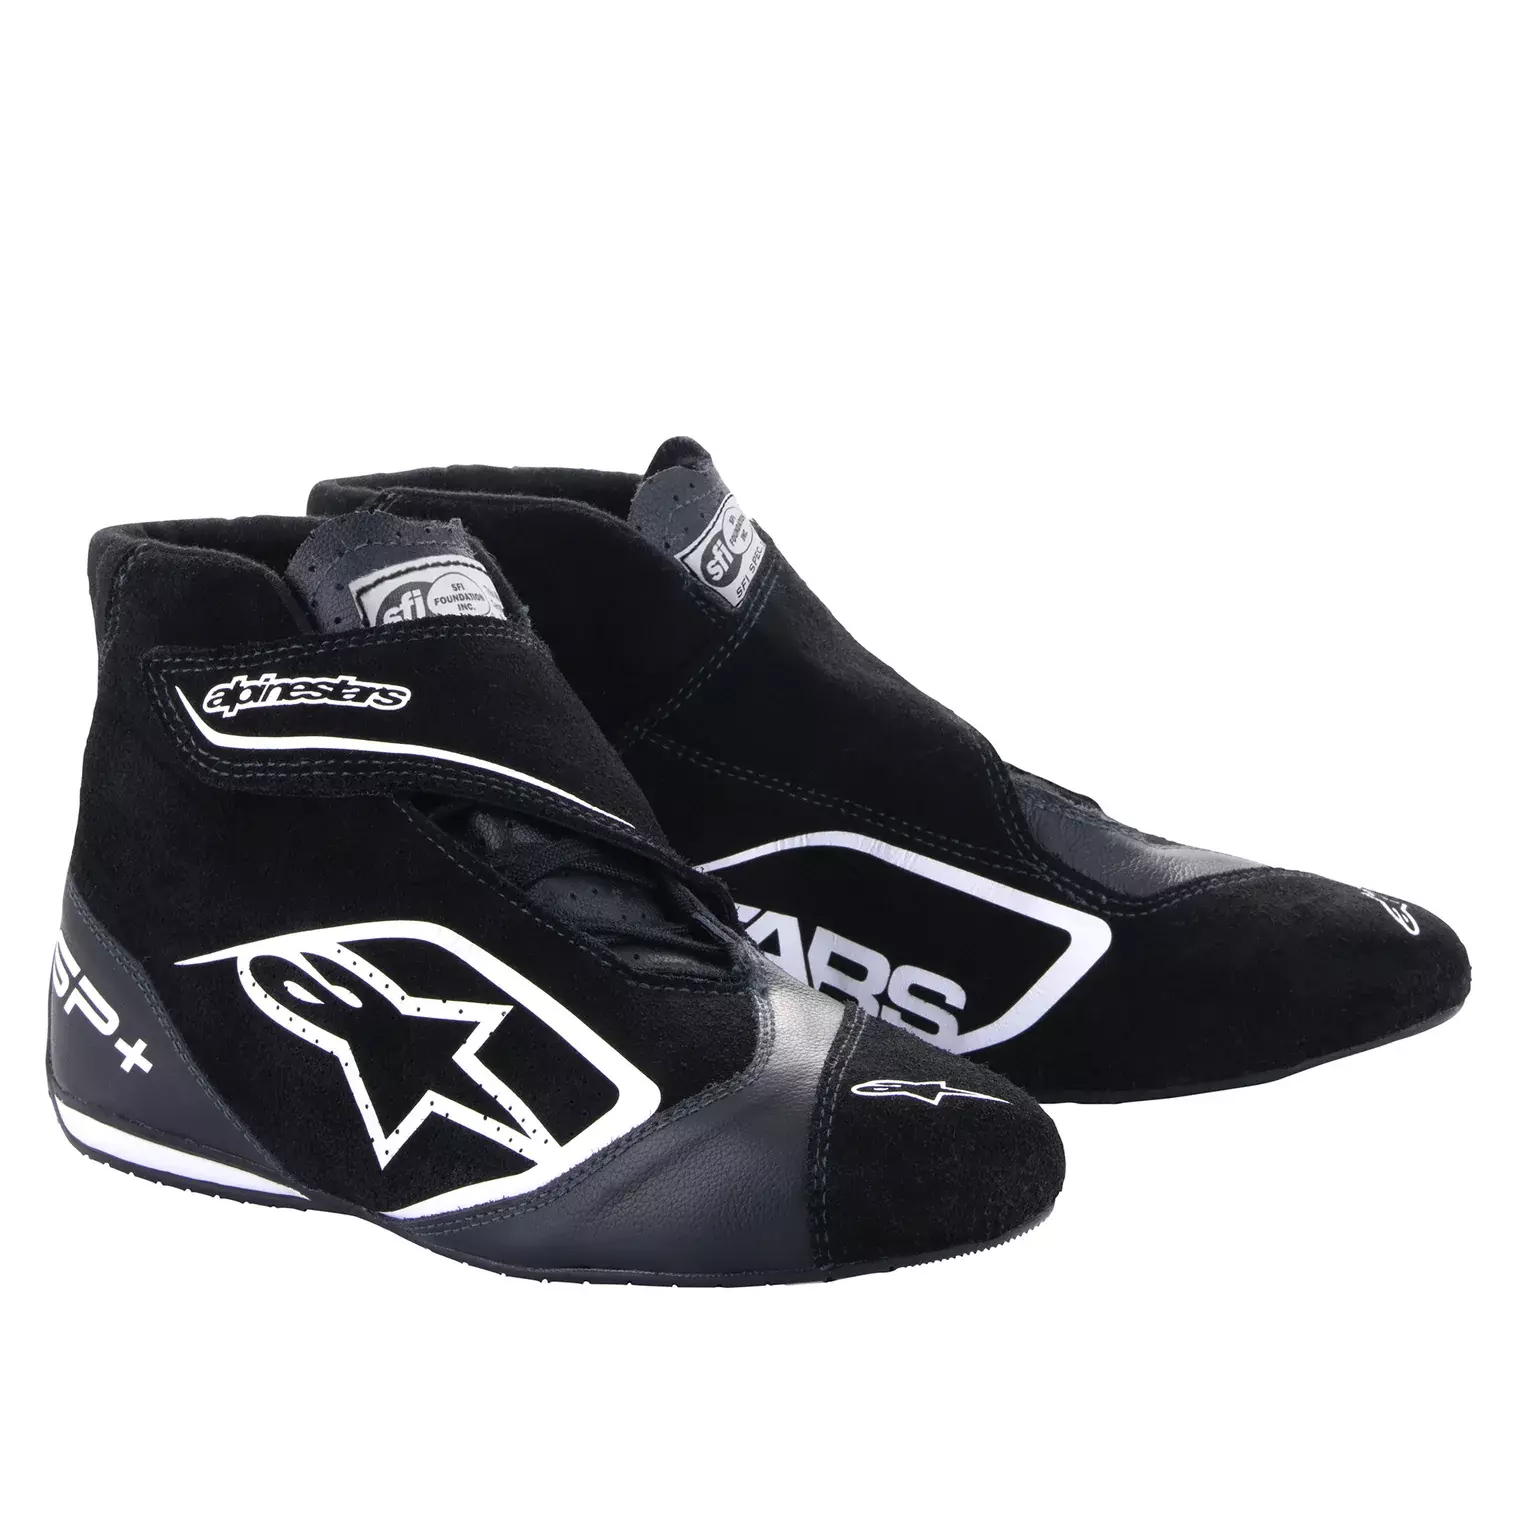 Alpinestars 2710823-12-9 Driving Shoe, SP+, Mid-Top, SFI 3.3, FIA Approved, Suede Outer, Nomex Inner, Black / White, Size 9, Pair